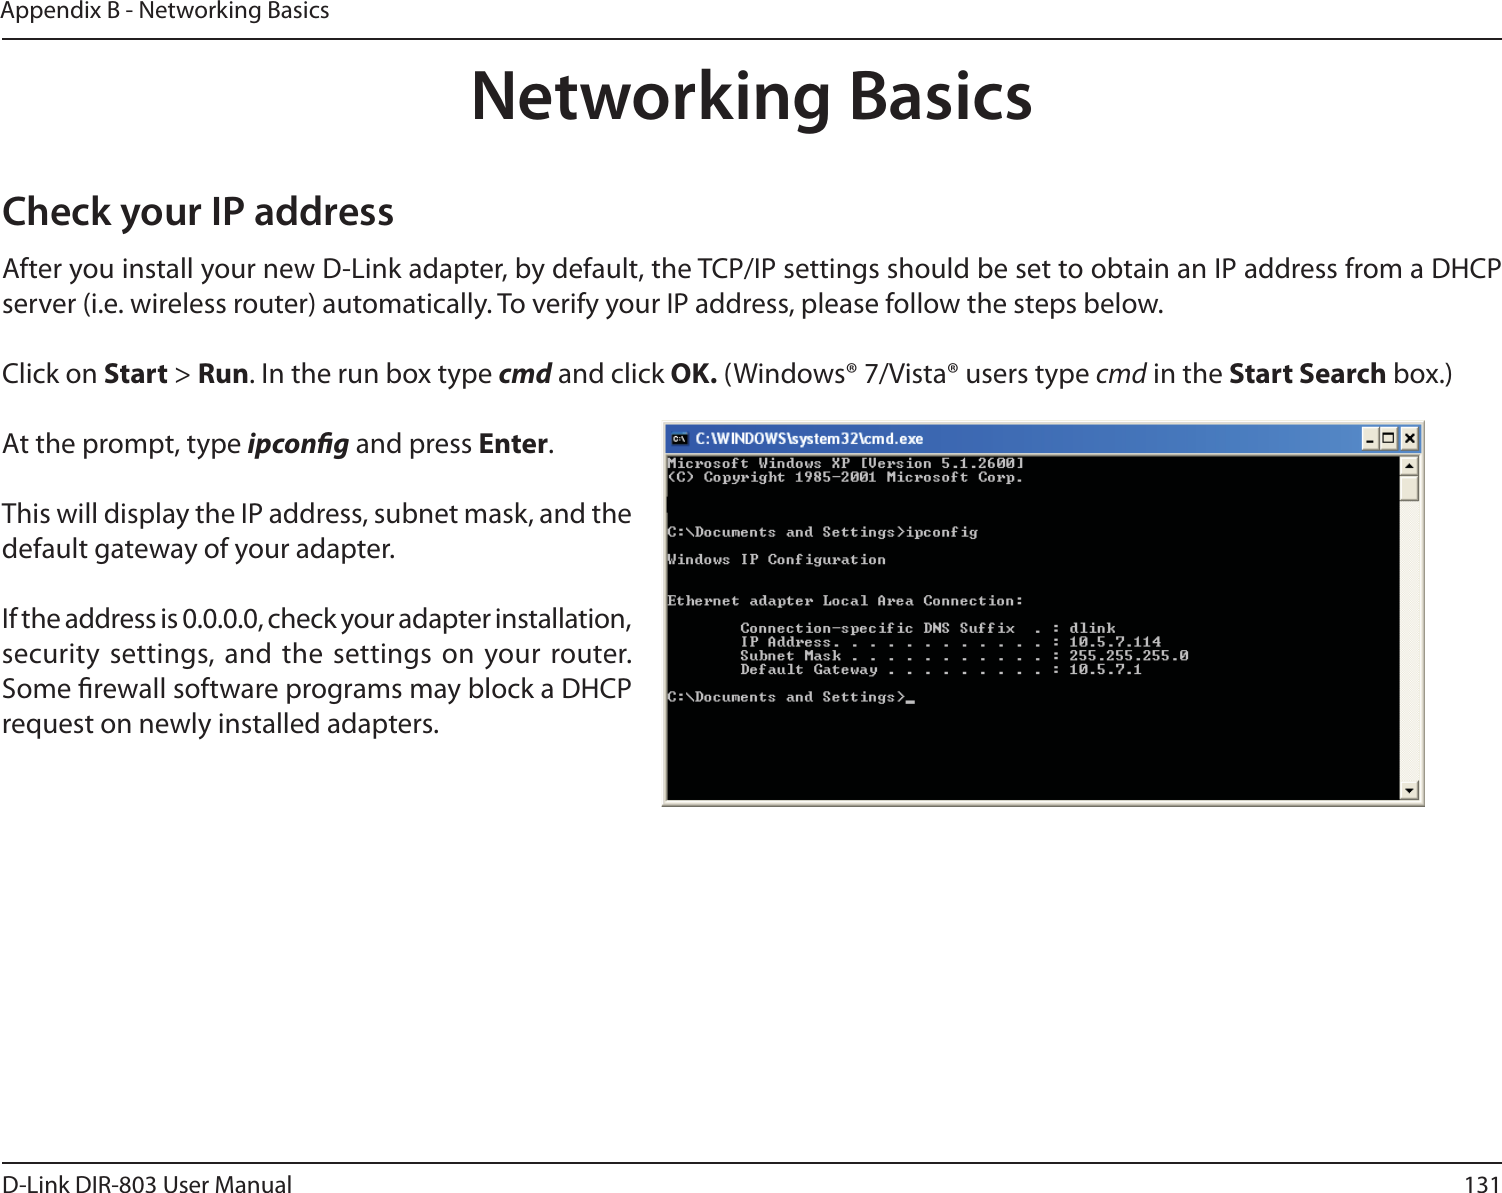 131D-Link DIR-803 User ManualAppendix B - Networking BasicsNetworking BasicsCheck your IP addressAfter you install your new D-Link adapter, by default, the TCP/IP settings should be set to obtain an IP address from a DHCP server (i.e. wireless router) automatically. To verify your IP address, please follow the steps below.Click on Start &gt; Run. In the run box type cmd and click OK. (Windows® 7/Vista® users type cmd in the Start Search box.)At the prompt, type ipcong and press Enter.This will display the IP address, subnet mask, and the default gateway of your adapter.If the address is 0.0.0.0, check your adapter installation, security settings, and the settings on your router. Some rewall software programs may block a DHCP request on newly installed adapters. 